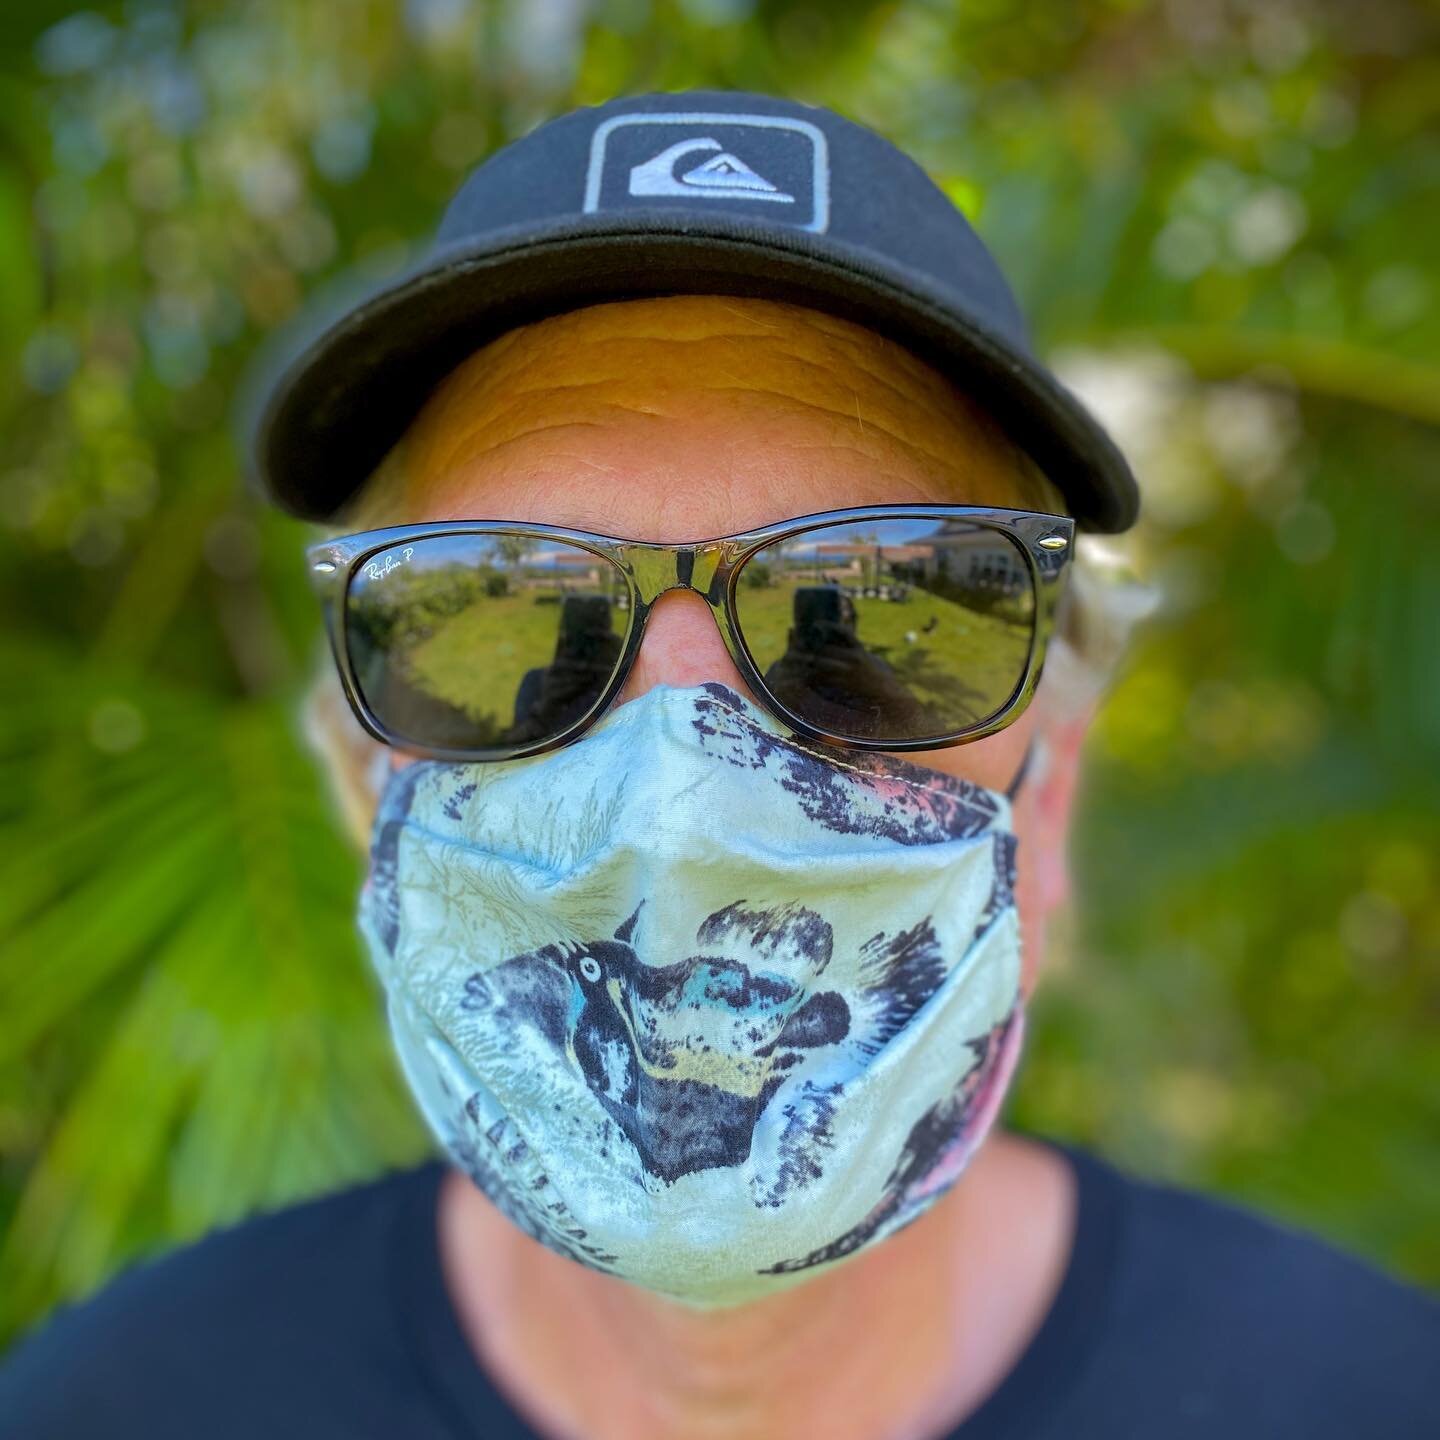 Can you say Humuhumunukunukuapua&rsquo;a three times fast?  Message me to get one for your Honey.
#masks #facemasksforsale #facemasks #madewithaloha  #covid19 #madeonthebigisland #wearmask #staysafe #stayhealthy #konahawaii #konahawaii #madewithlove